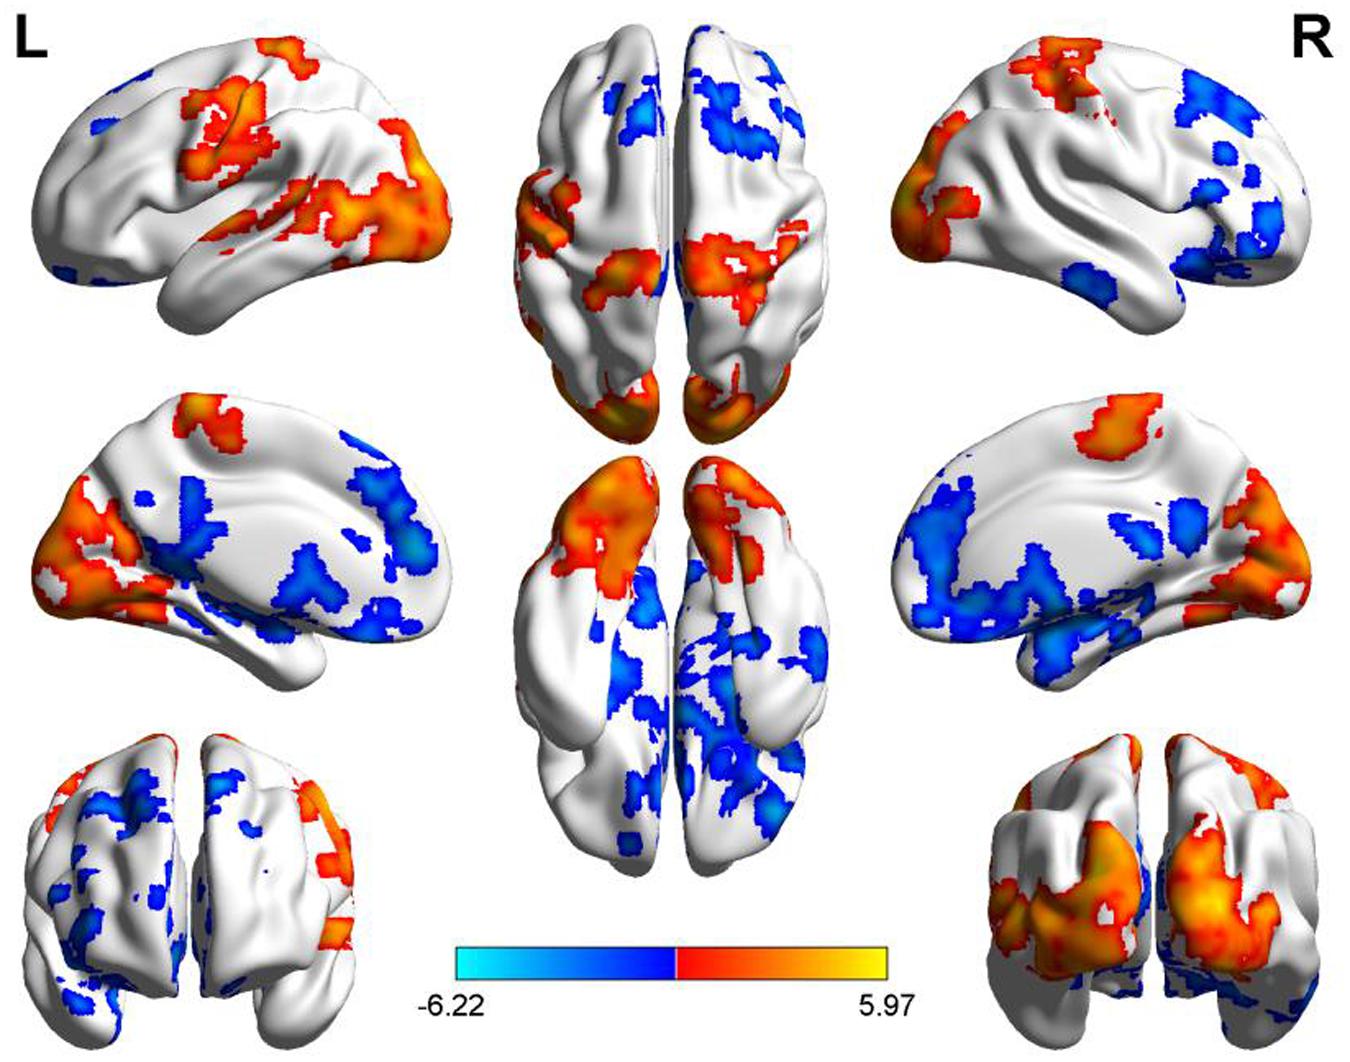 Frontiers  Diurnal Variations in Neural Activity of Healthy Human